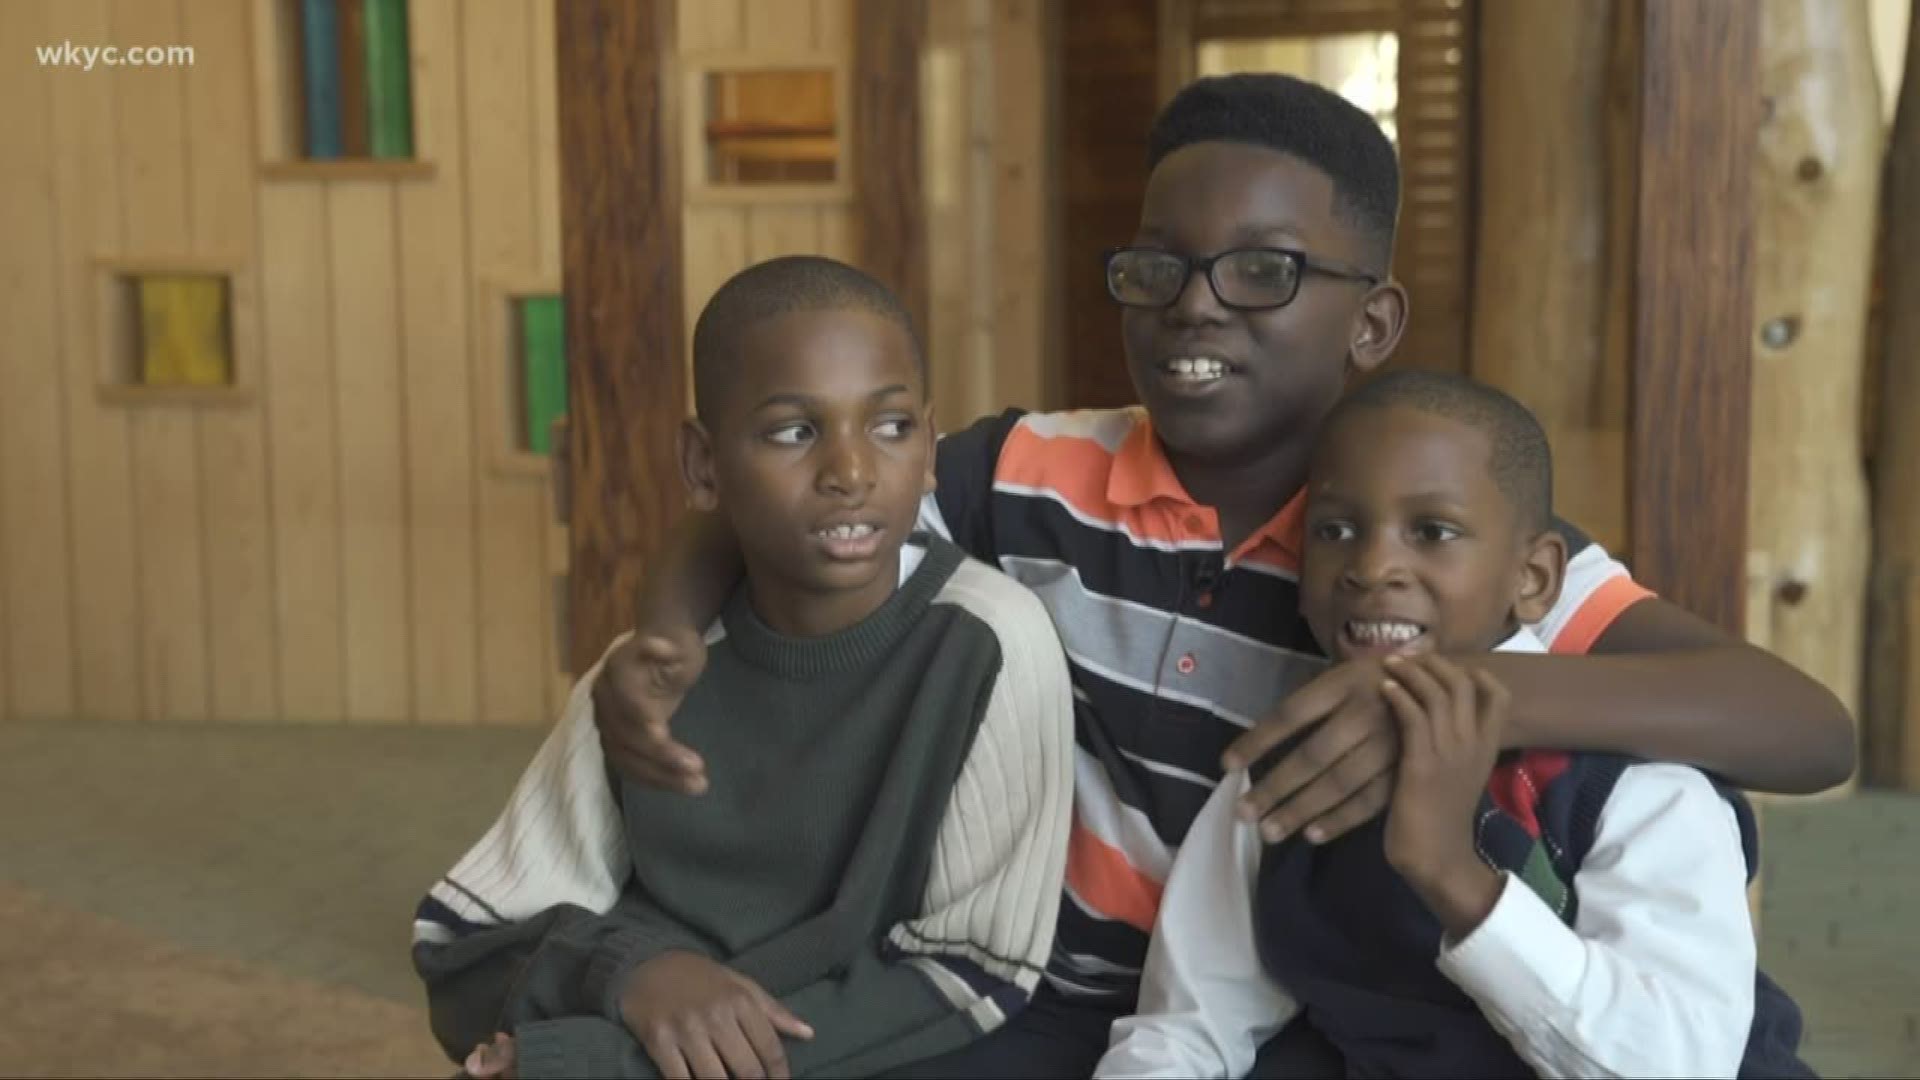 A Cleveland boy has one adoption wish. He's hoping somebody is willing to adopt him and his two brothers so they can stick together.